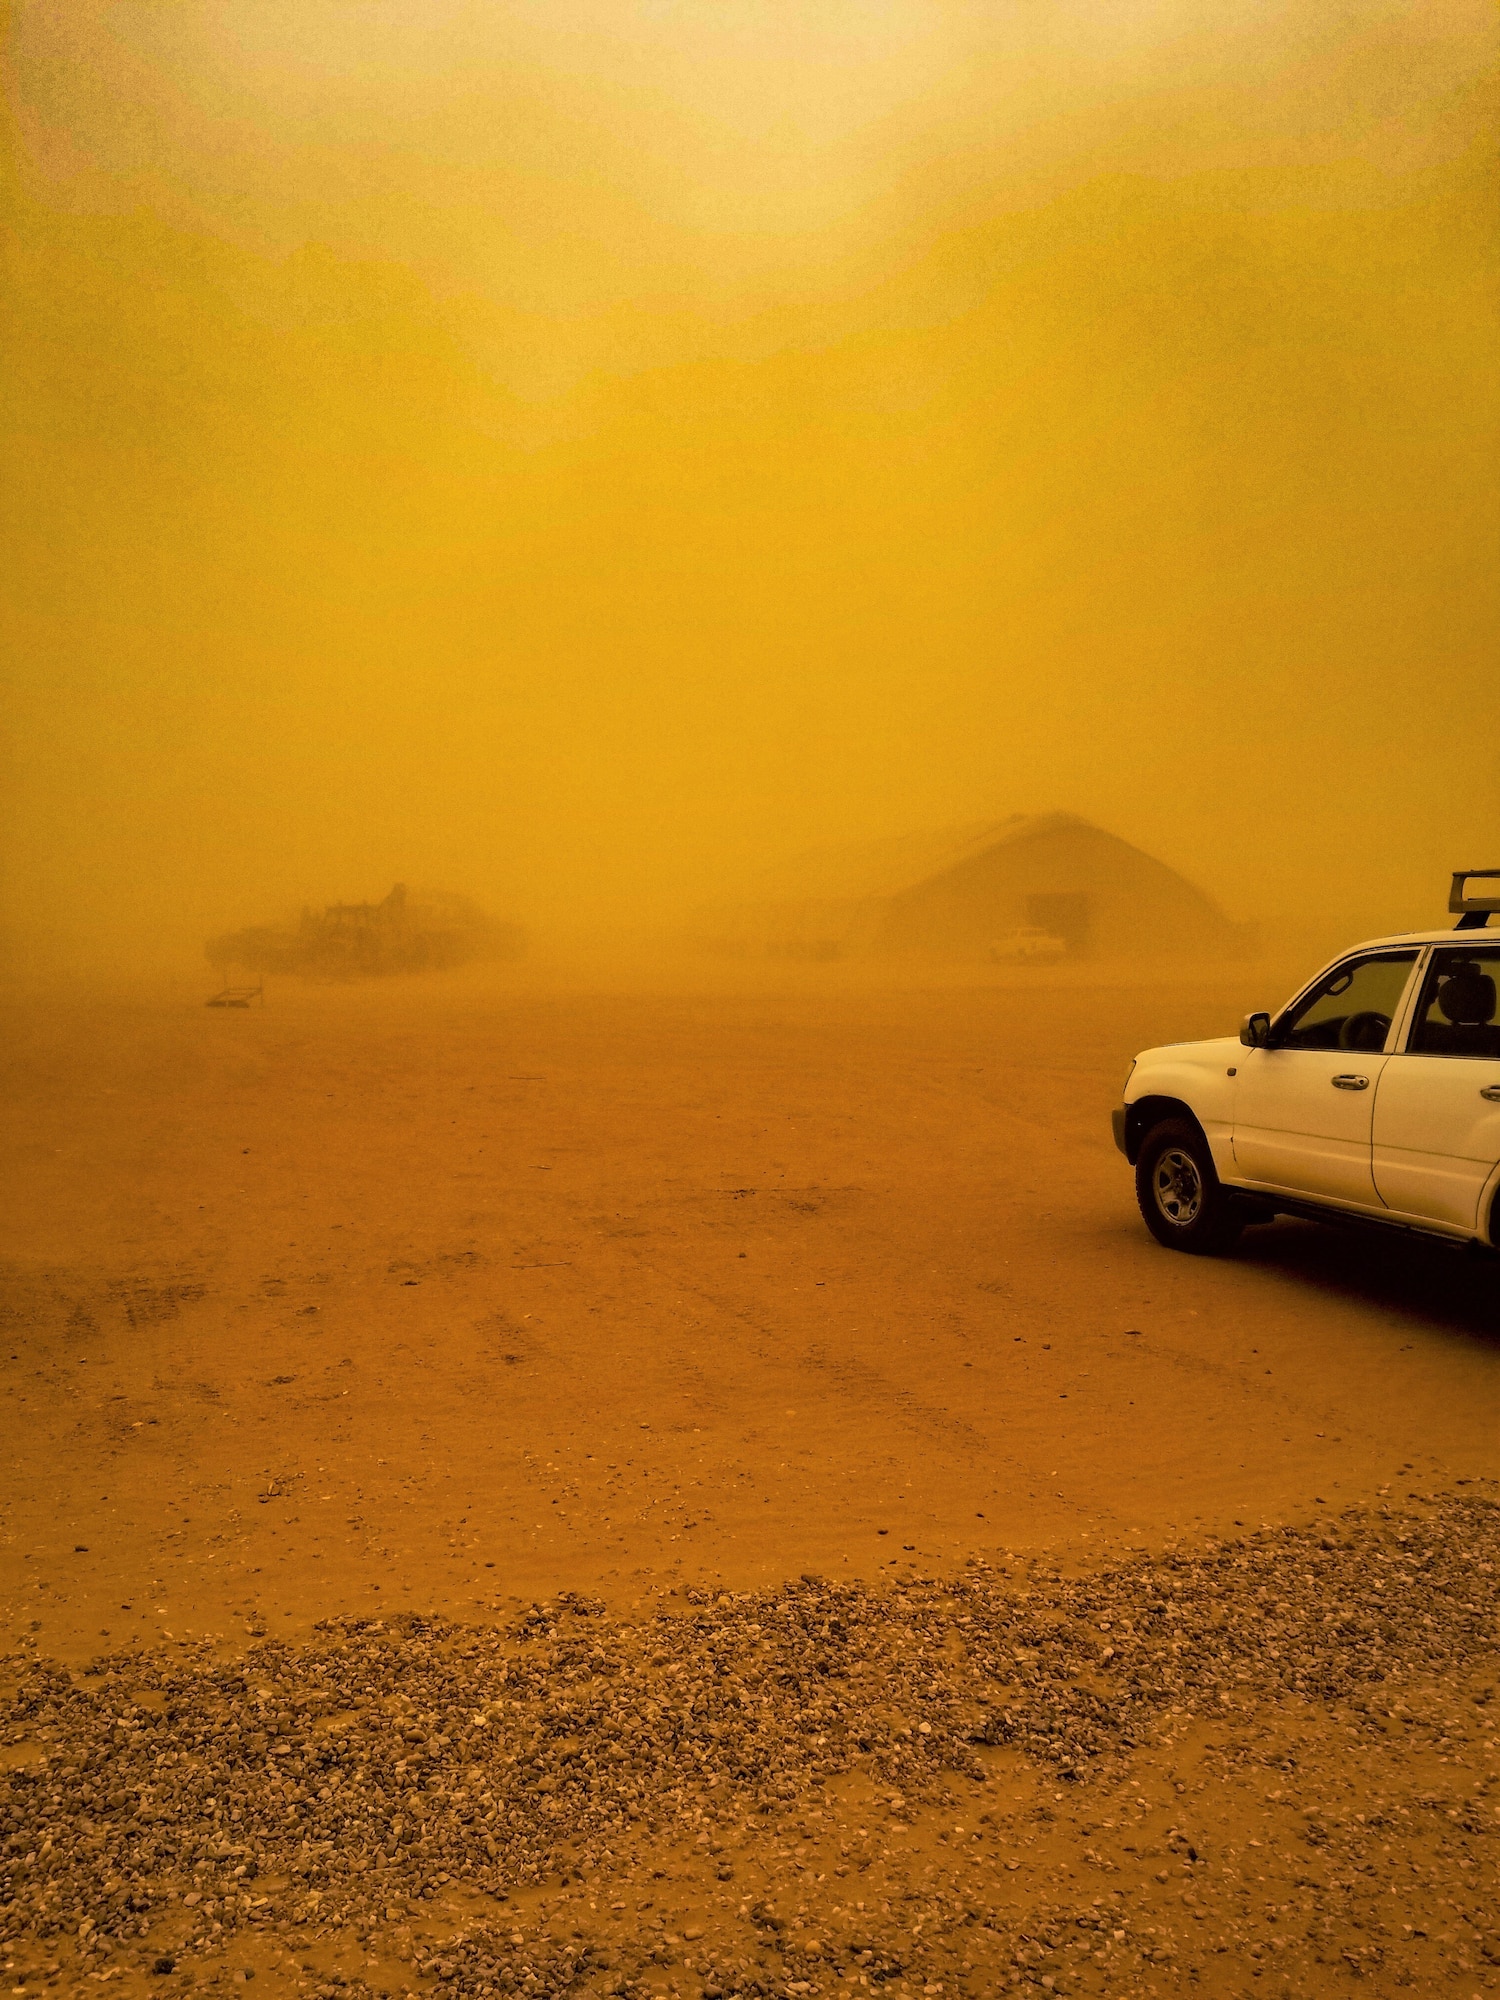 Visibility lowers as a sand storm passes through the region at Nigerien Air Base 201, Niger, June 24, 2018. Visibility can decrease during sand storms depending on the level of severity. (U.S. Air Force courtesy photo by Airman 1st Class Anthony Montero)